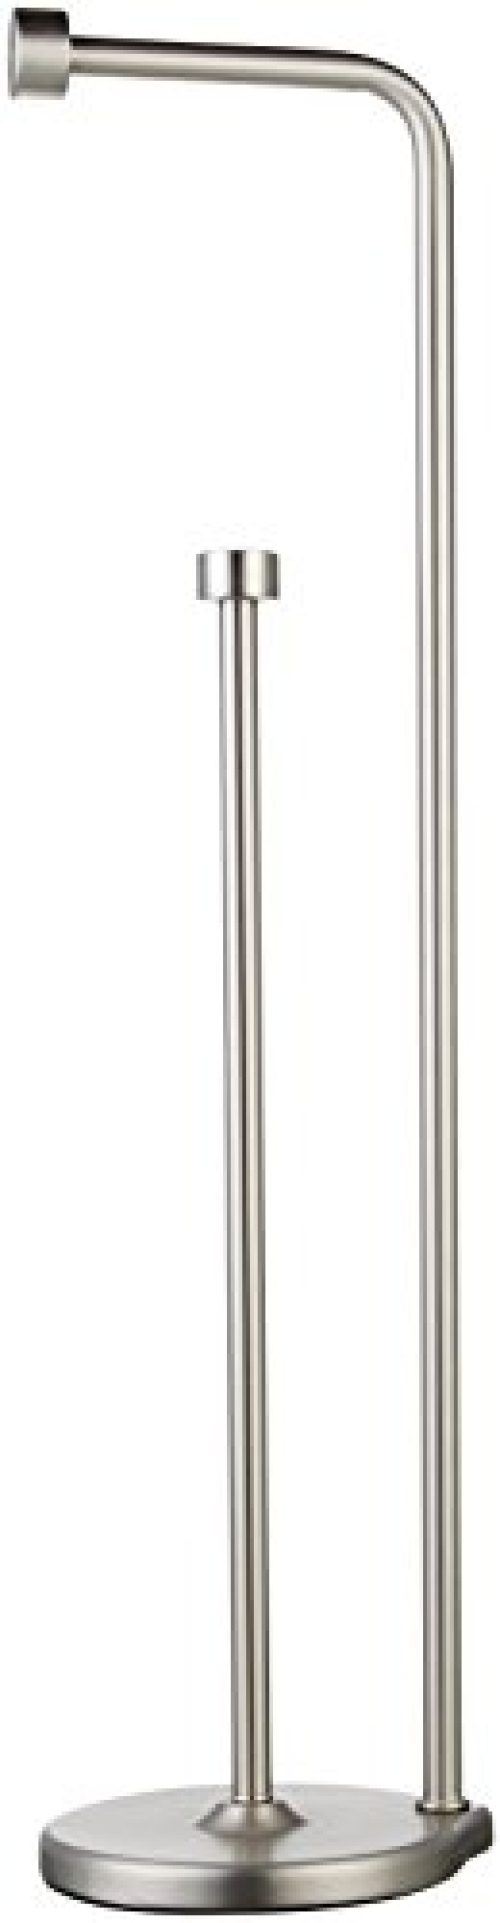 Amazon Basics Free Standing Bathroom Toilet Paper Holder Stand with Reserve, Silver Nickel